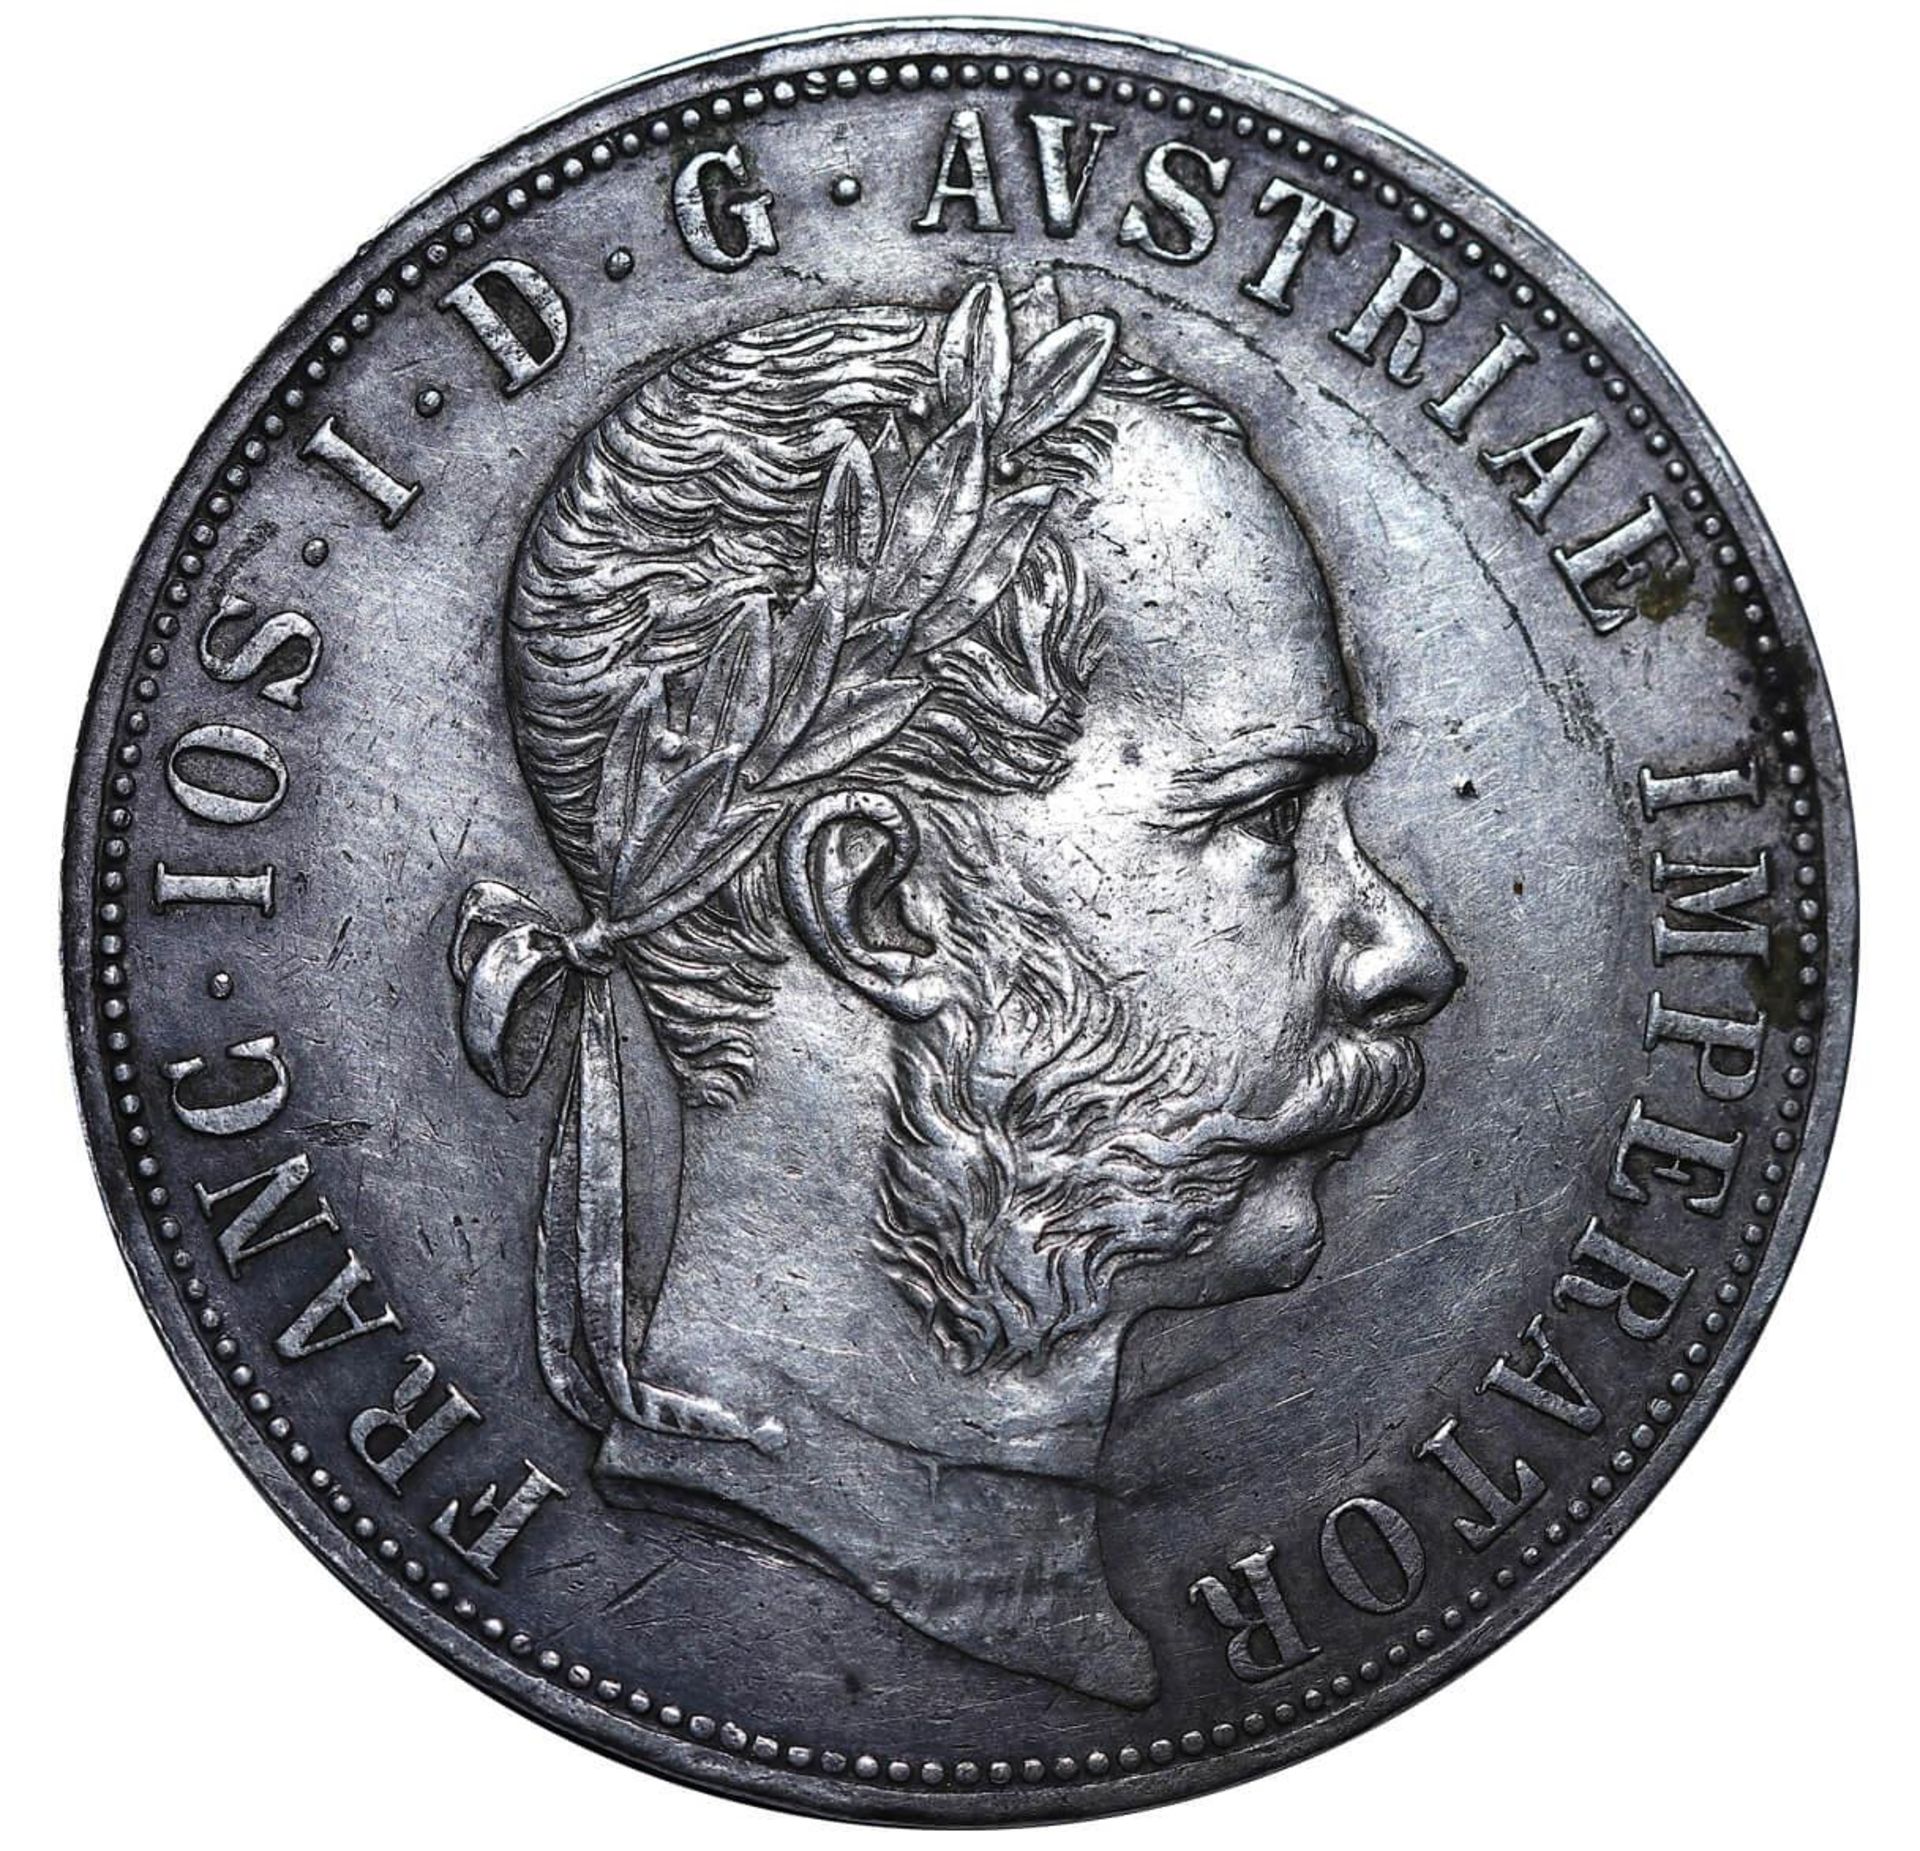 Austria, 2 Florin, 1883 year - Image 2 of 3